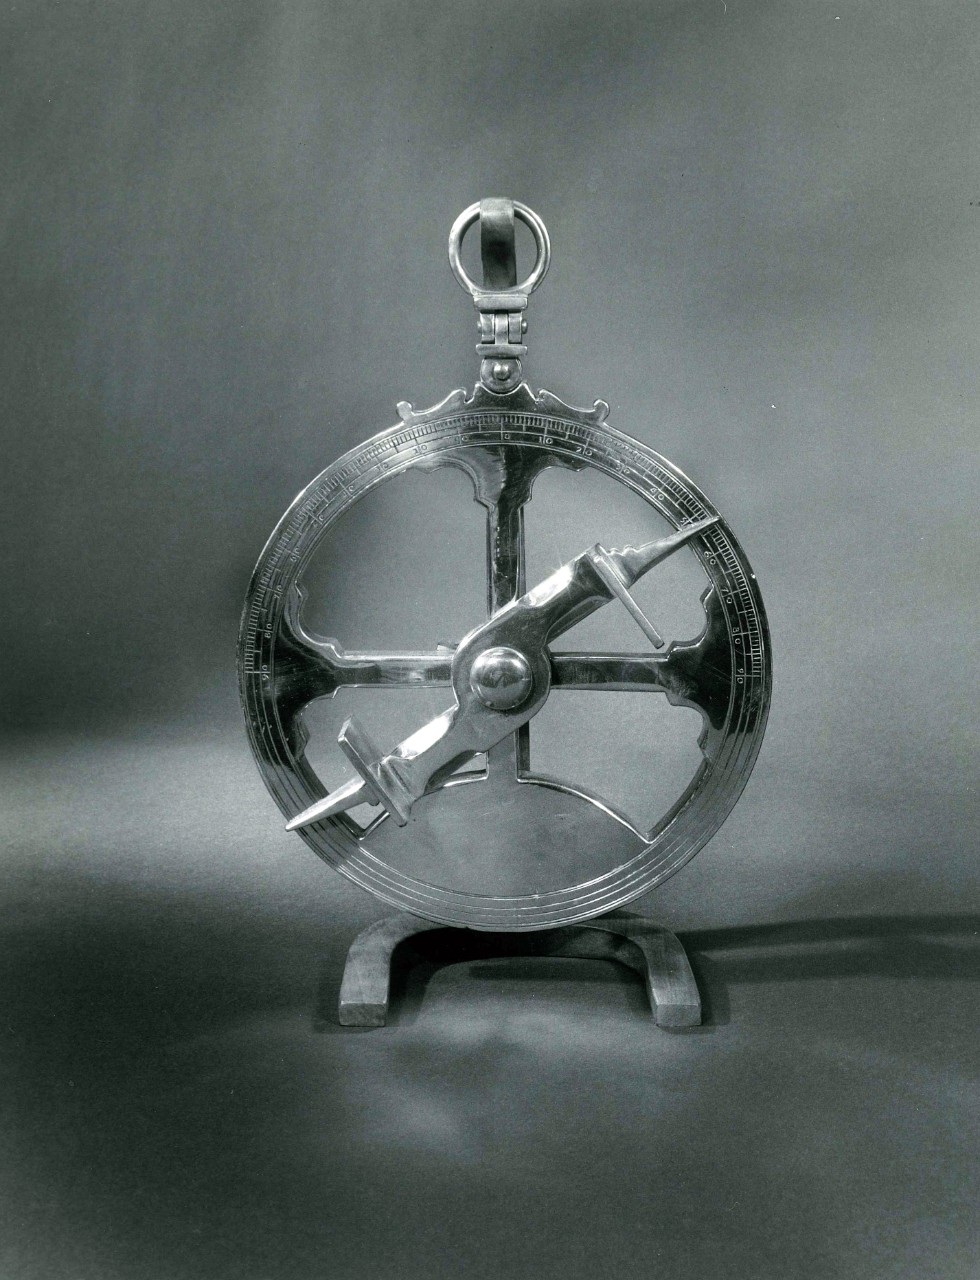 NMUSN-2845: Portuguese Astrolabe, 1970s. Artifact was on display in the Navigation Exhibit area. National Museum of the U.S. Navy Photograph Collection.